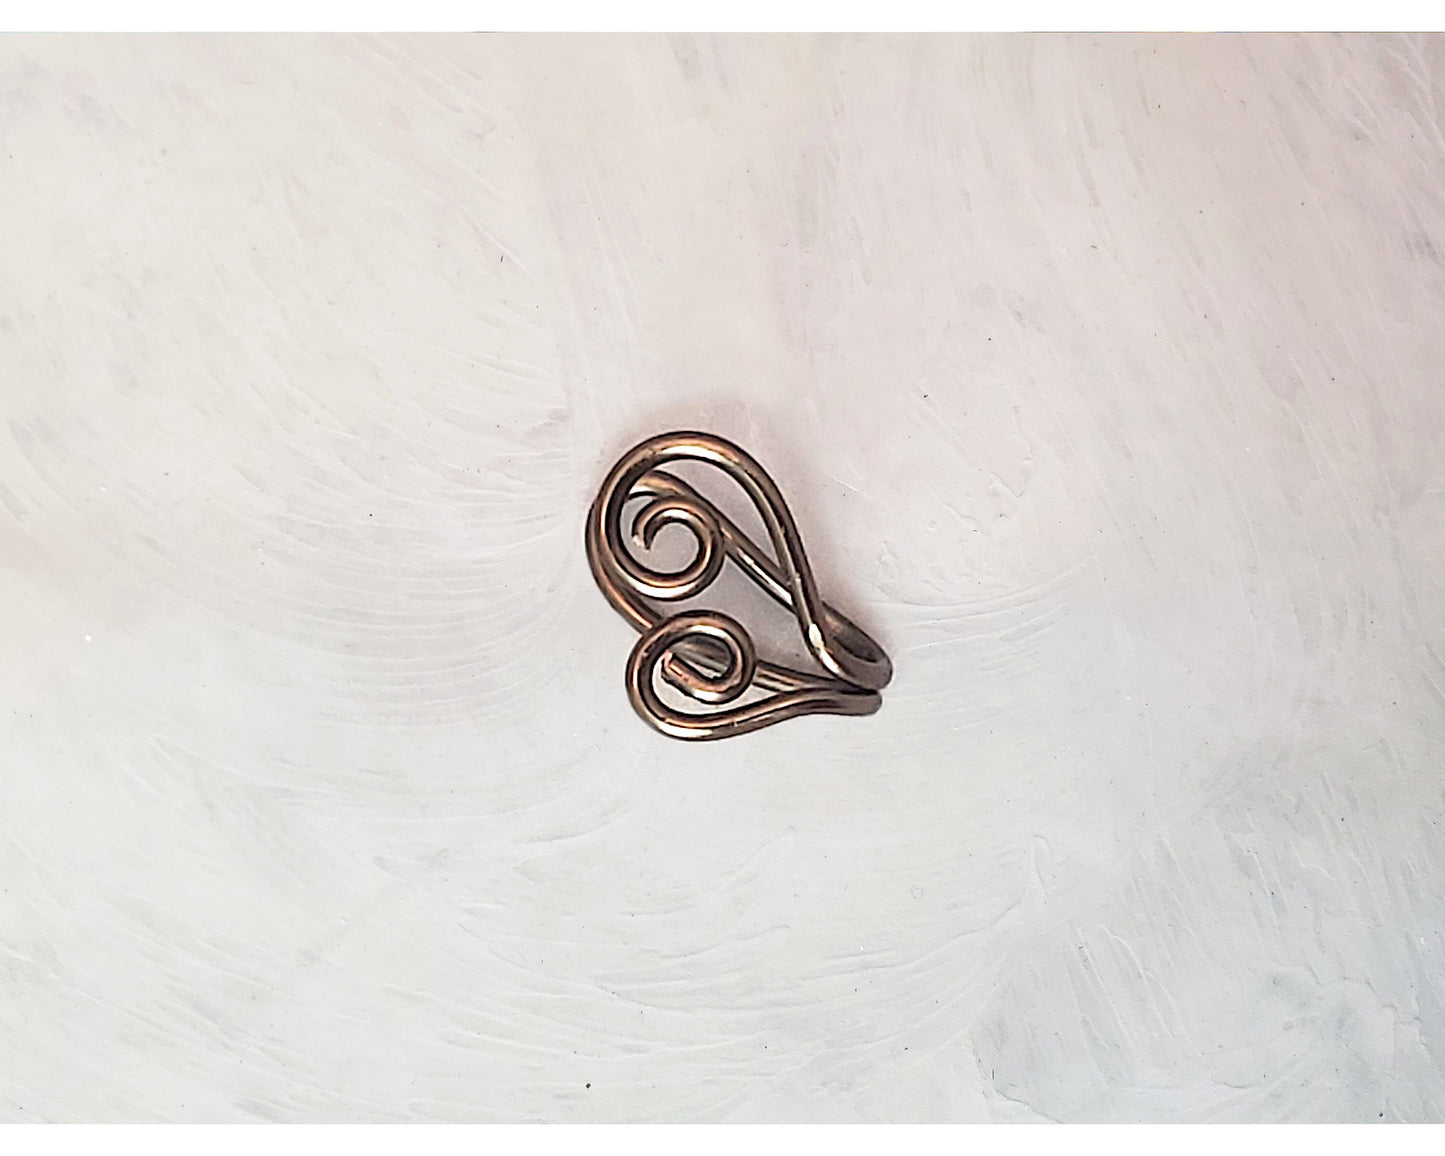 Ear Tragus or Nose Side Cuff, Double Spiral, Adjustable, Simple, Minimalist, Unisex, Boho, Beach, Choice of Colors and Metals